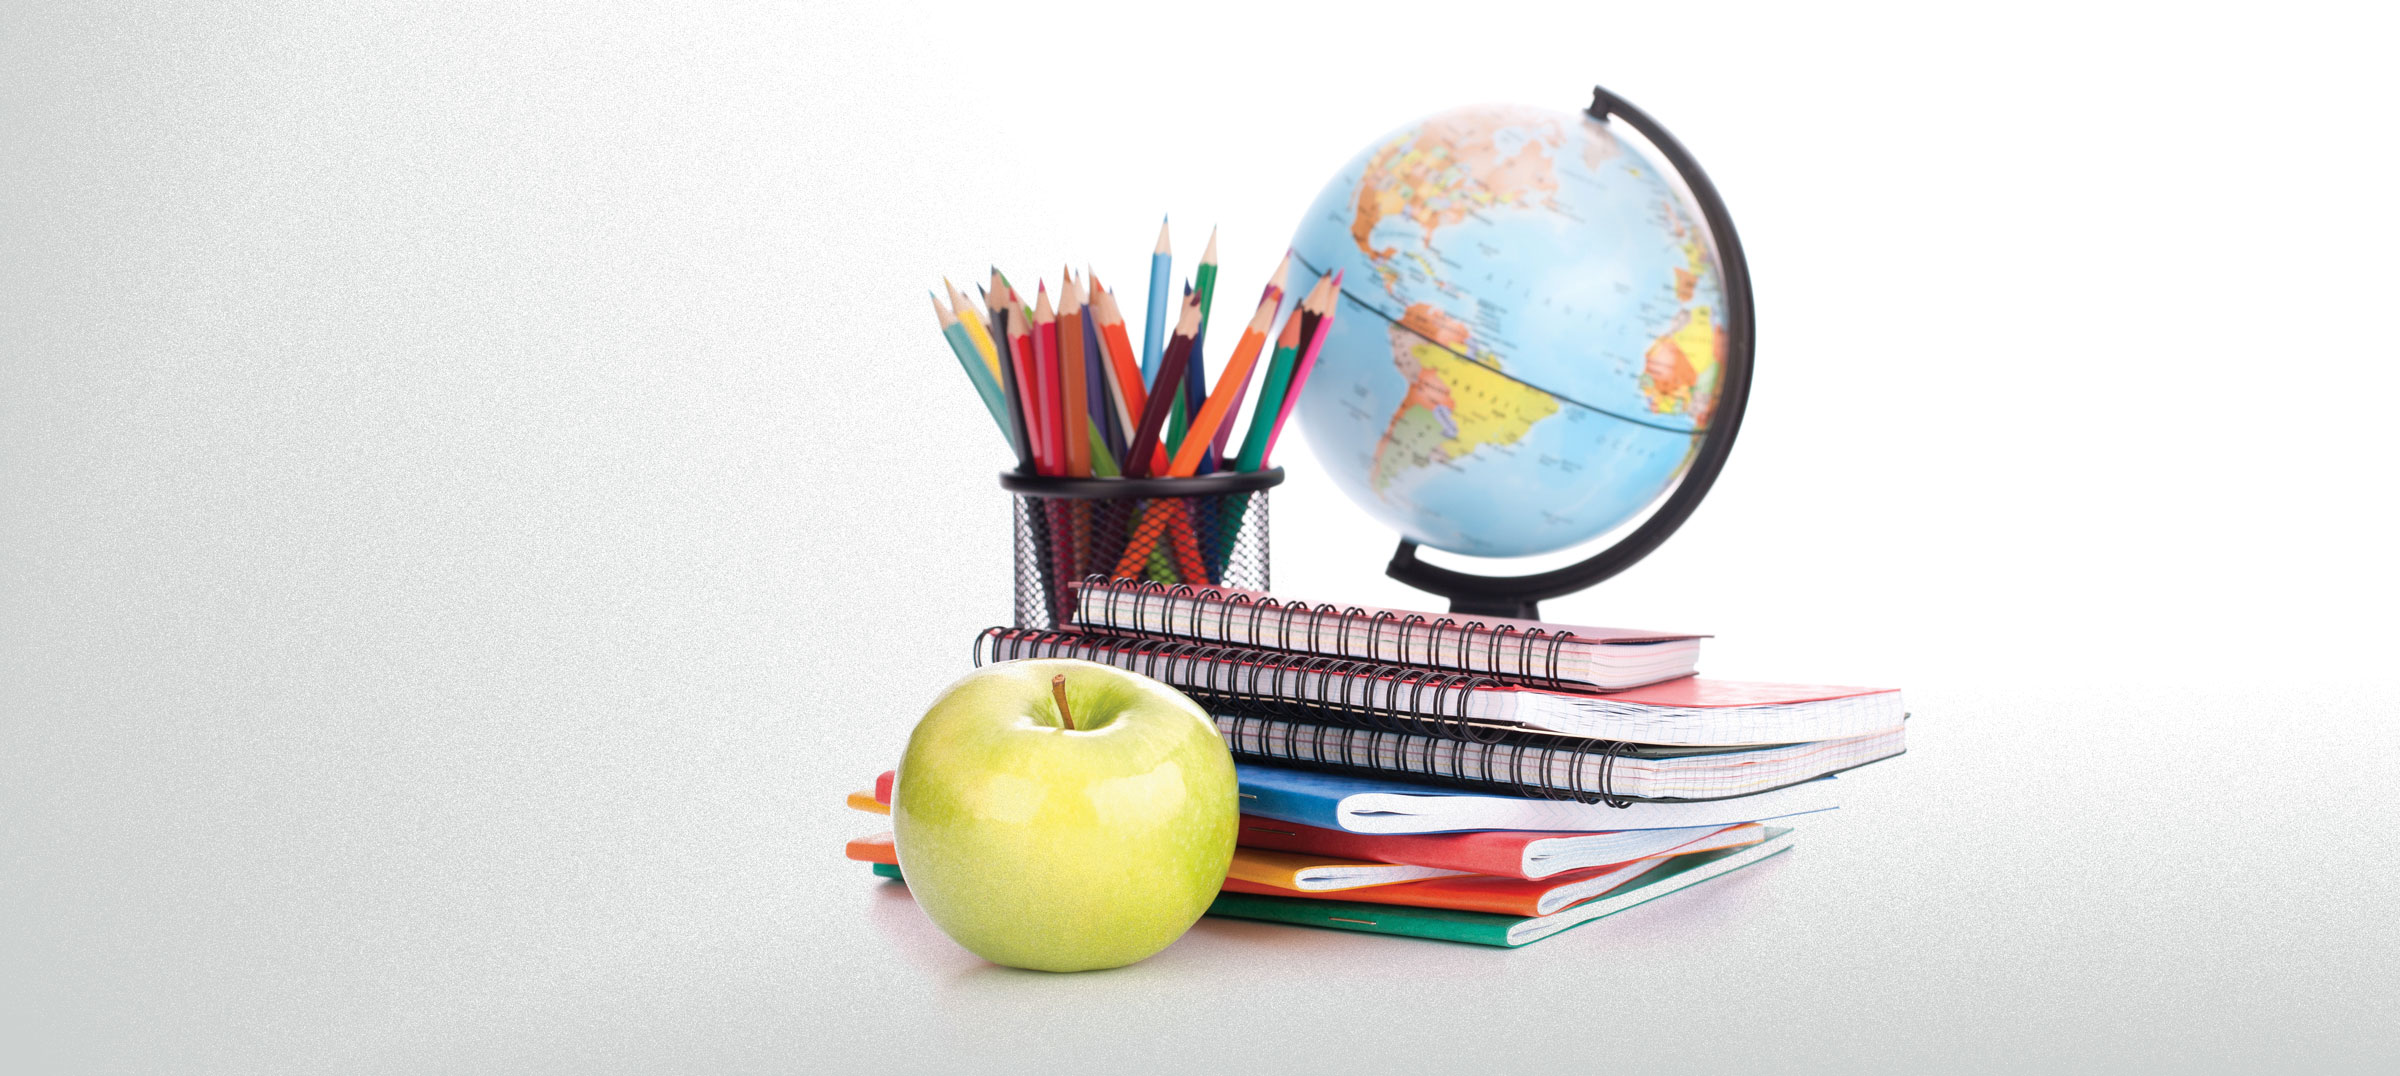 teacher materials, colored pencils, golden delicious apple and a globe